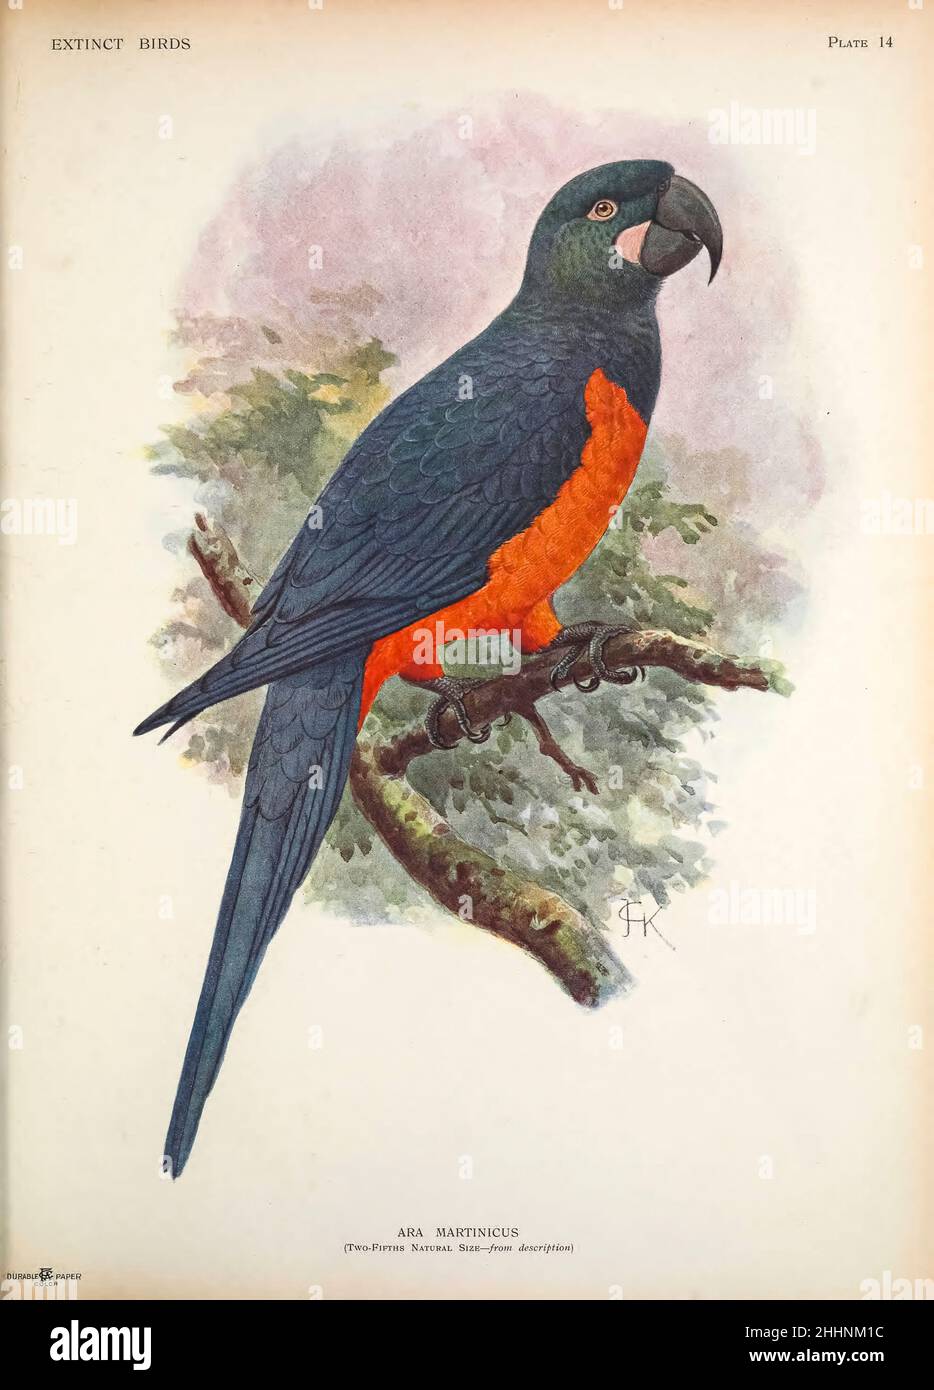 The Martinique macaw or orange-bellied macaw (Ara martinicus) is a hypothetical extinct species of macaw which may have been endemic to the Lesser Antillean island of Martinique, in the eastern Caribbean Sea. It was scientifically named by Walter Rothschild in 1905, based on a 1630s description of 'blue and orange-yellow' macaws by Jacques Bouton. Hypothetical 1907 illustration by by John Gerrard Keulemans based on Bouton's description from ' Extinct birds ' : an attempt to unite in one volume a short account of those birds which have become extinct in historical times : that is, within the la Stock Photo